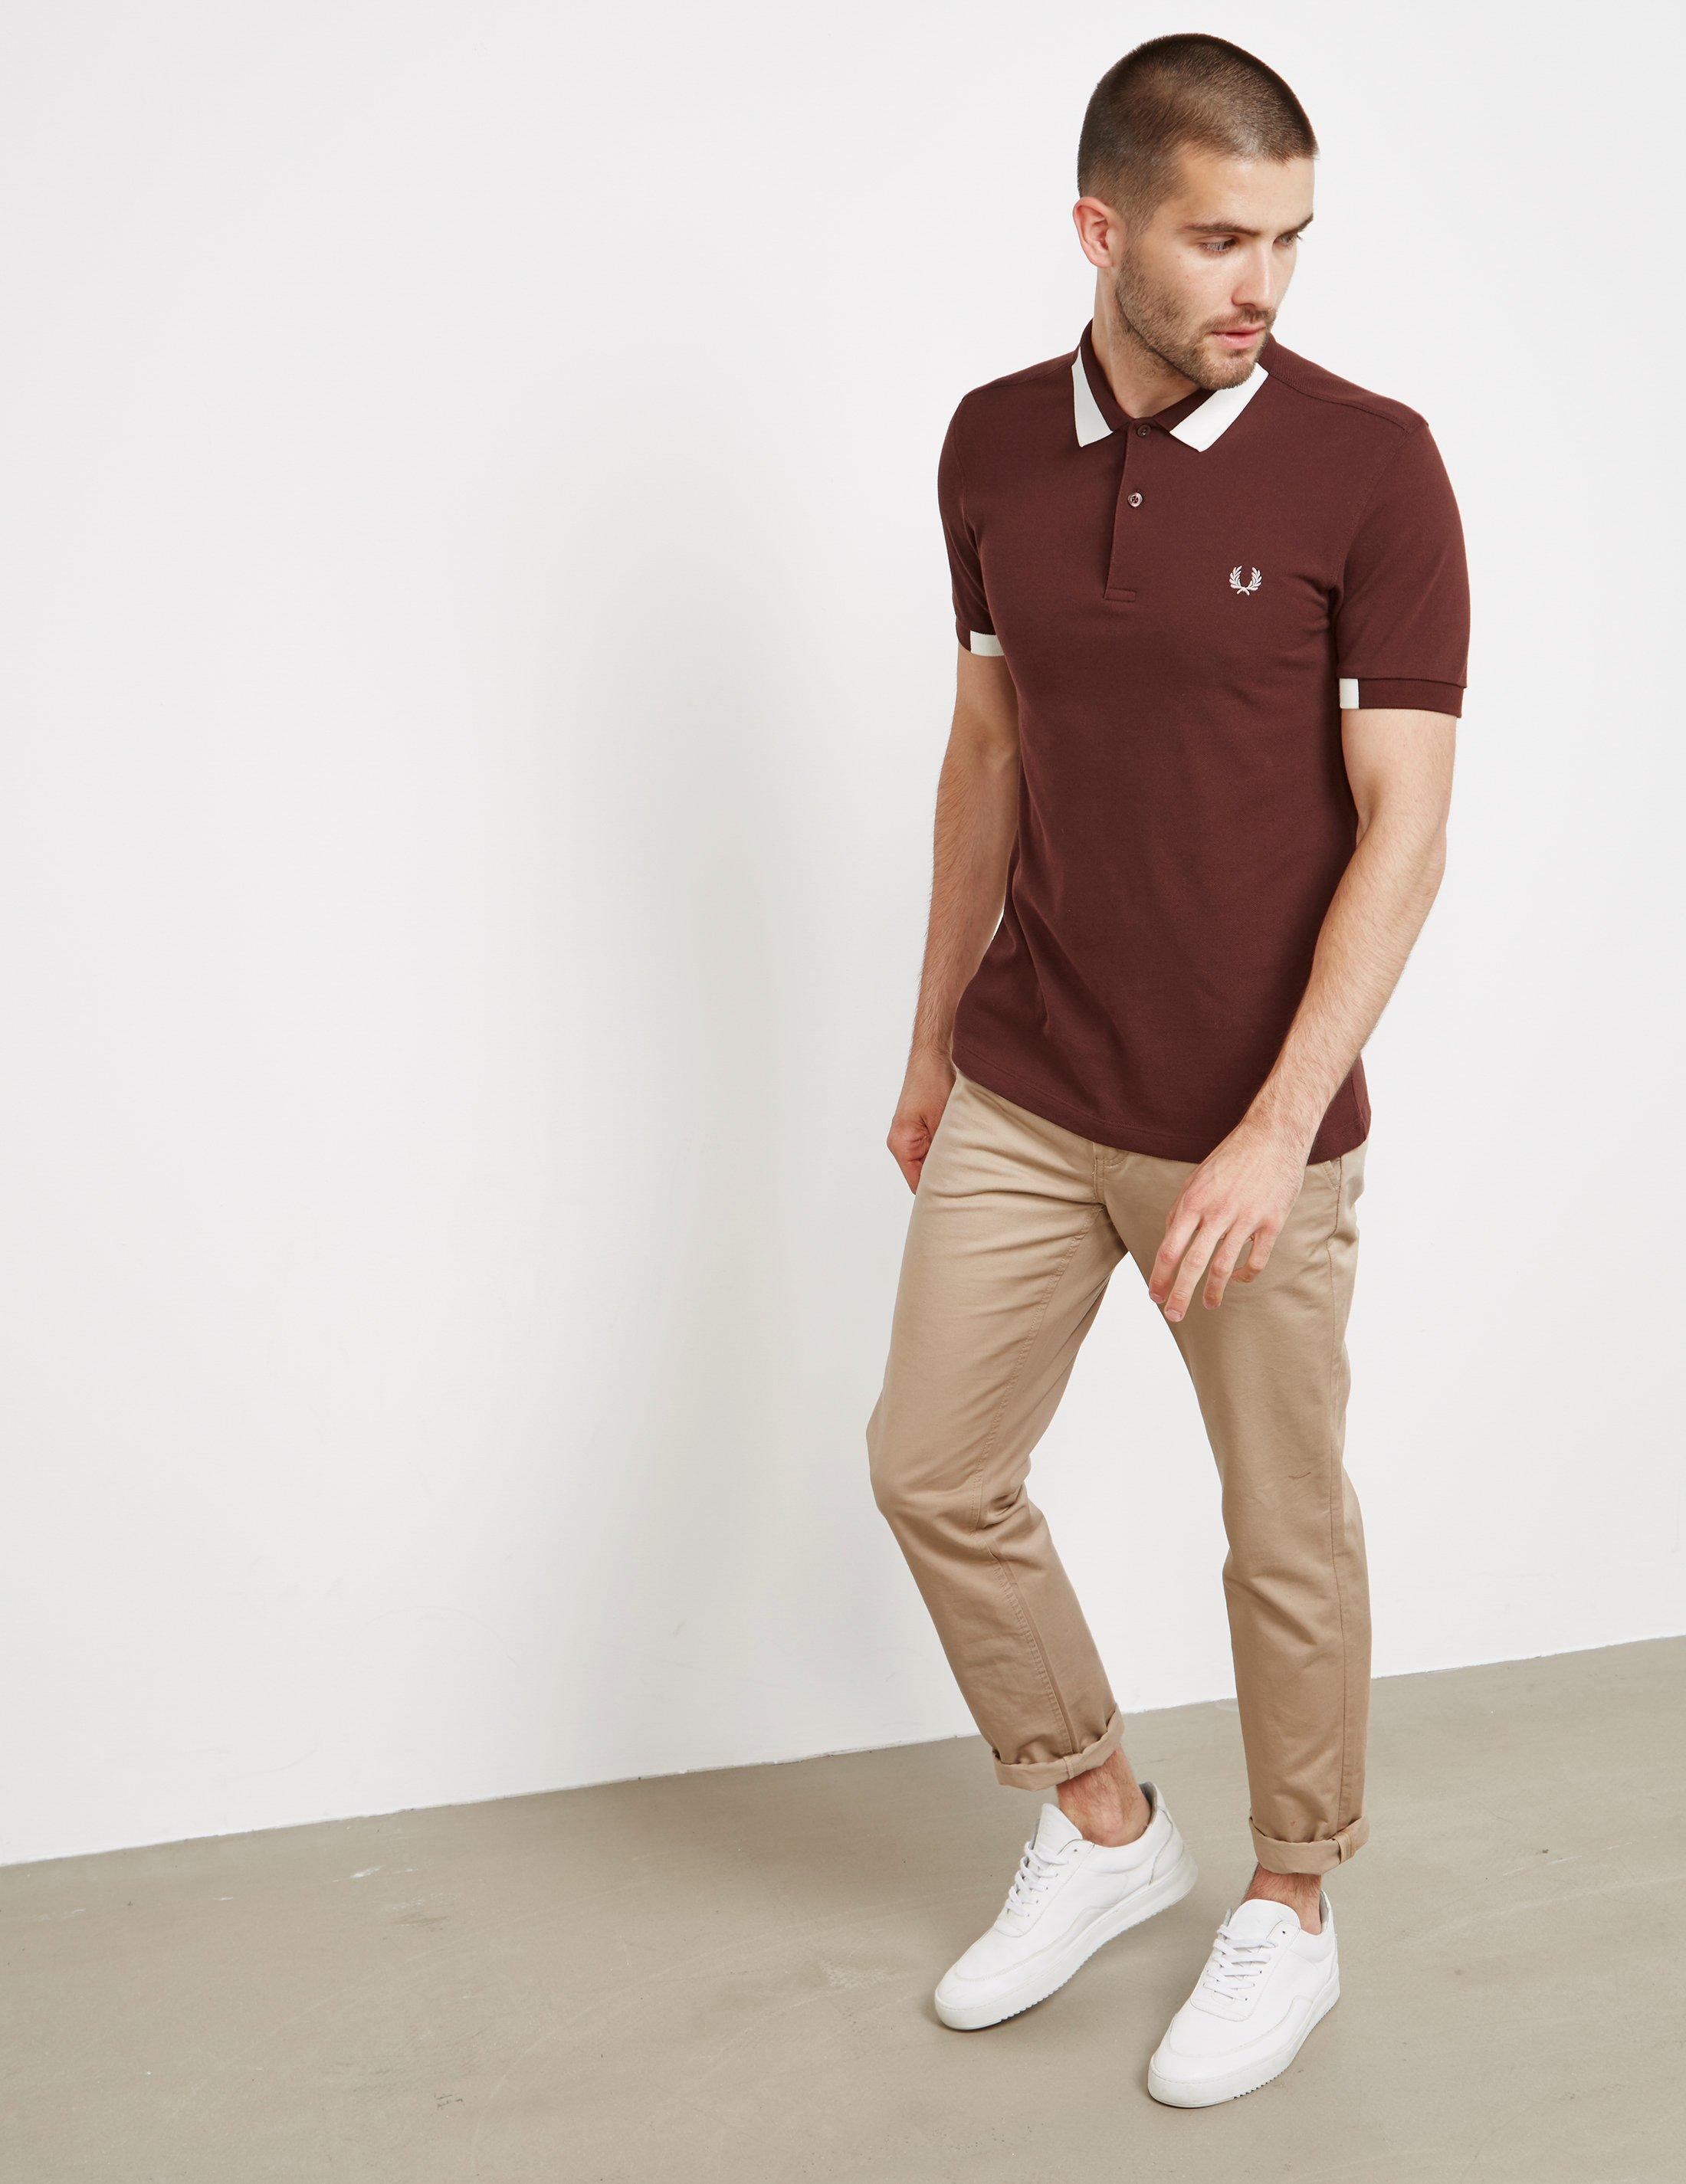 Fred Perry Cotton Mens Block Tipped Short Sleeve Polo Shirt Burgundy/ burgundy in Purple for Men - Lyst